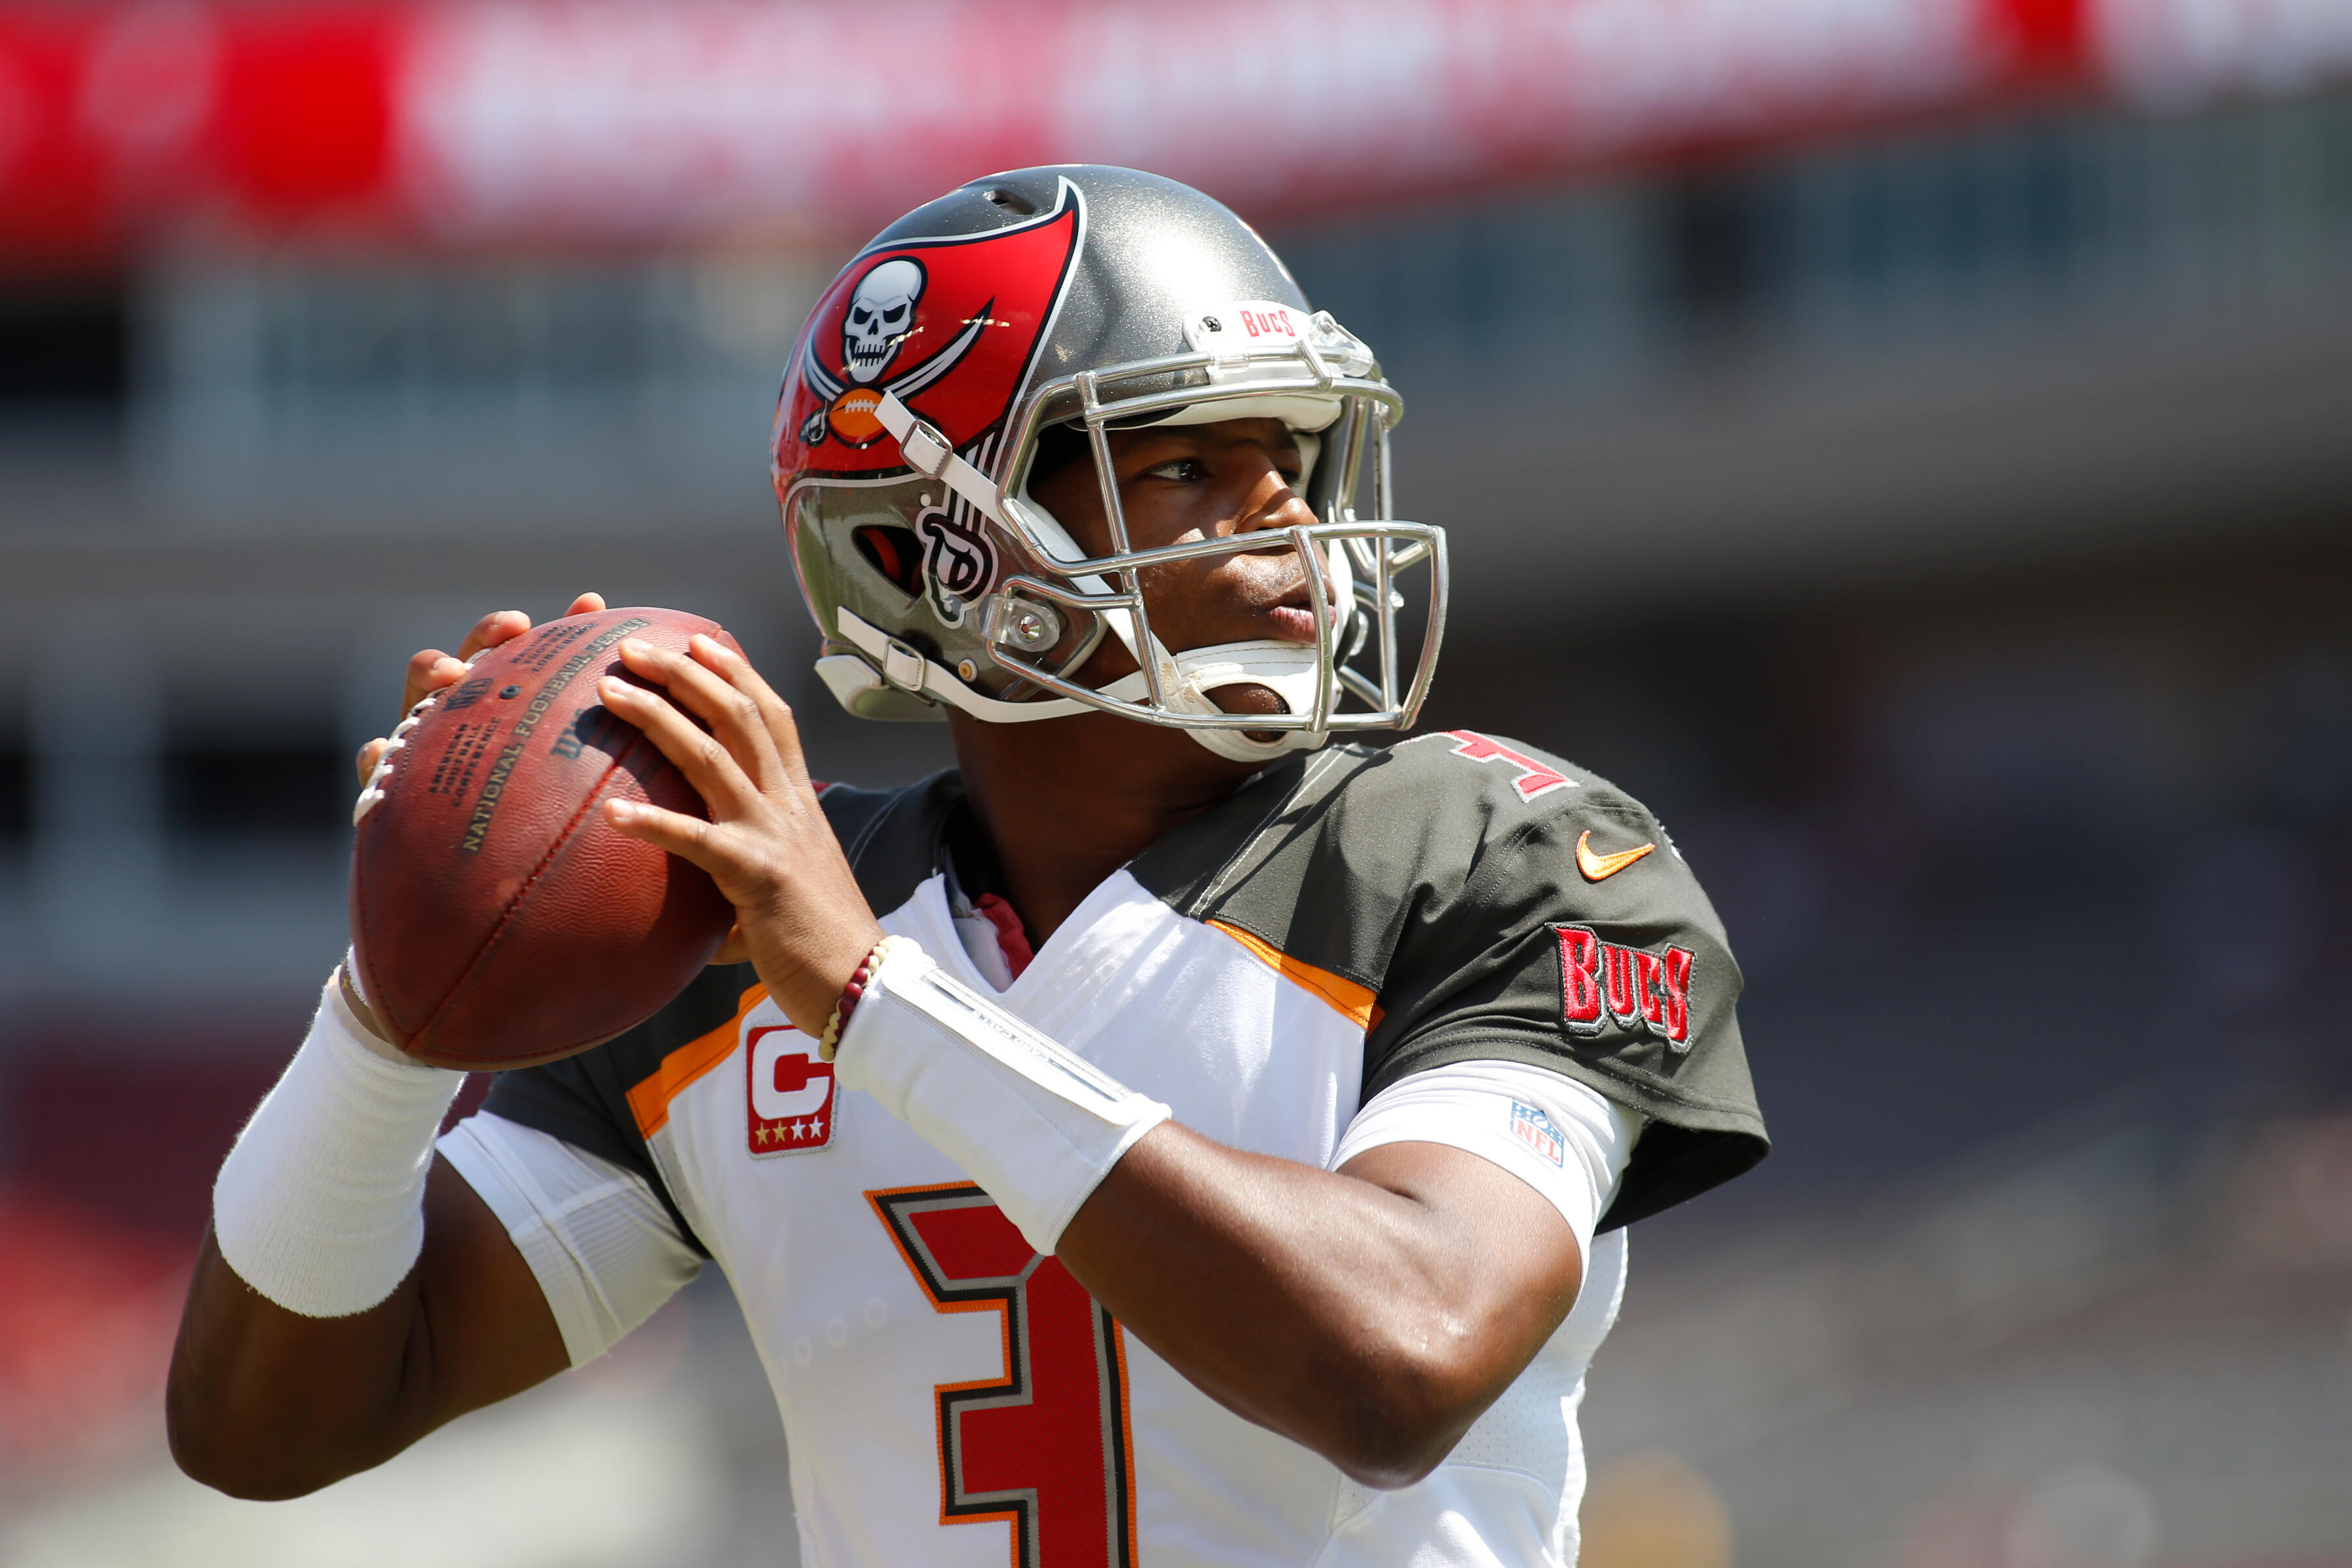 TAMPA, FL - SEPTEMBER 17: Quarterback Jameis Winston #3 of the Tampa Bay Buccaneers warms up before the start of an NFL football game against the Chicago Bears on September 17, 2017 at Raymond James Stadium in Tampa, Florida. (Photo by Brian Blanco/Getty Images)